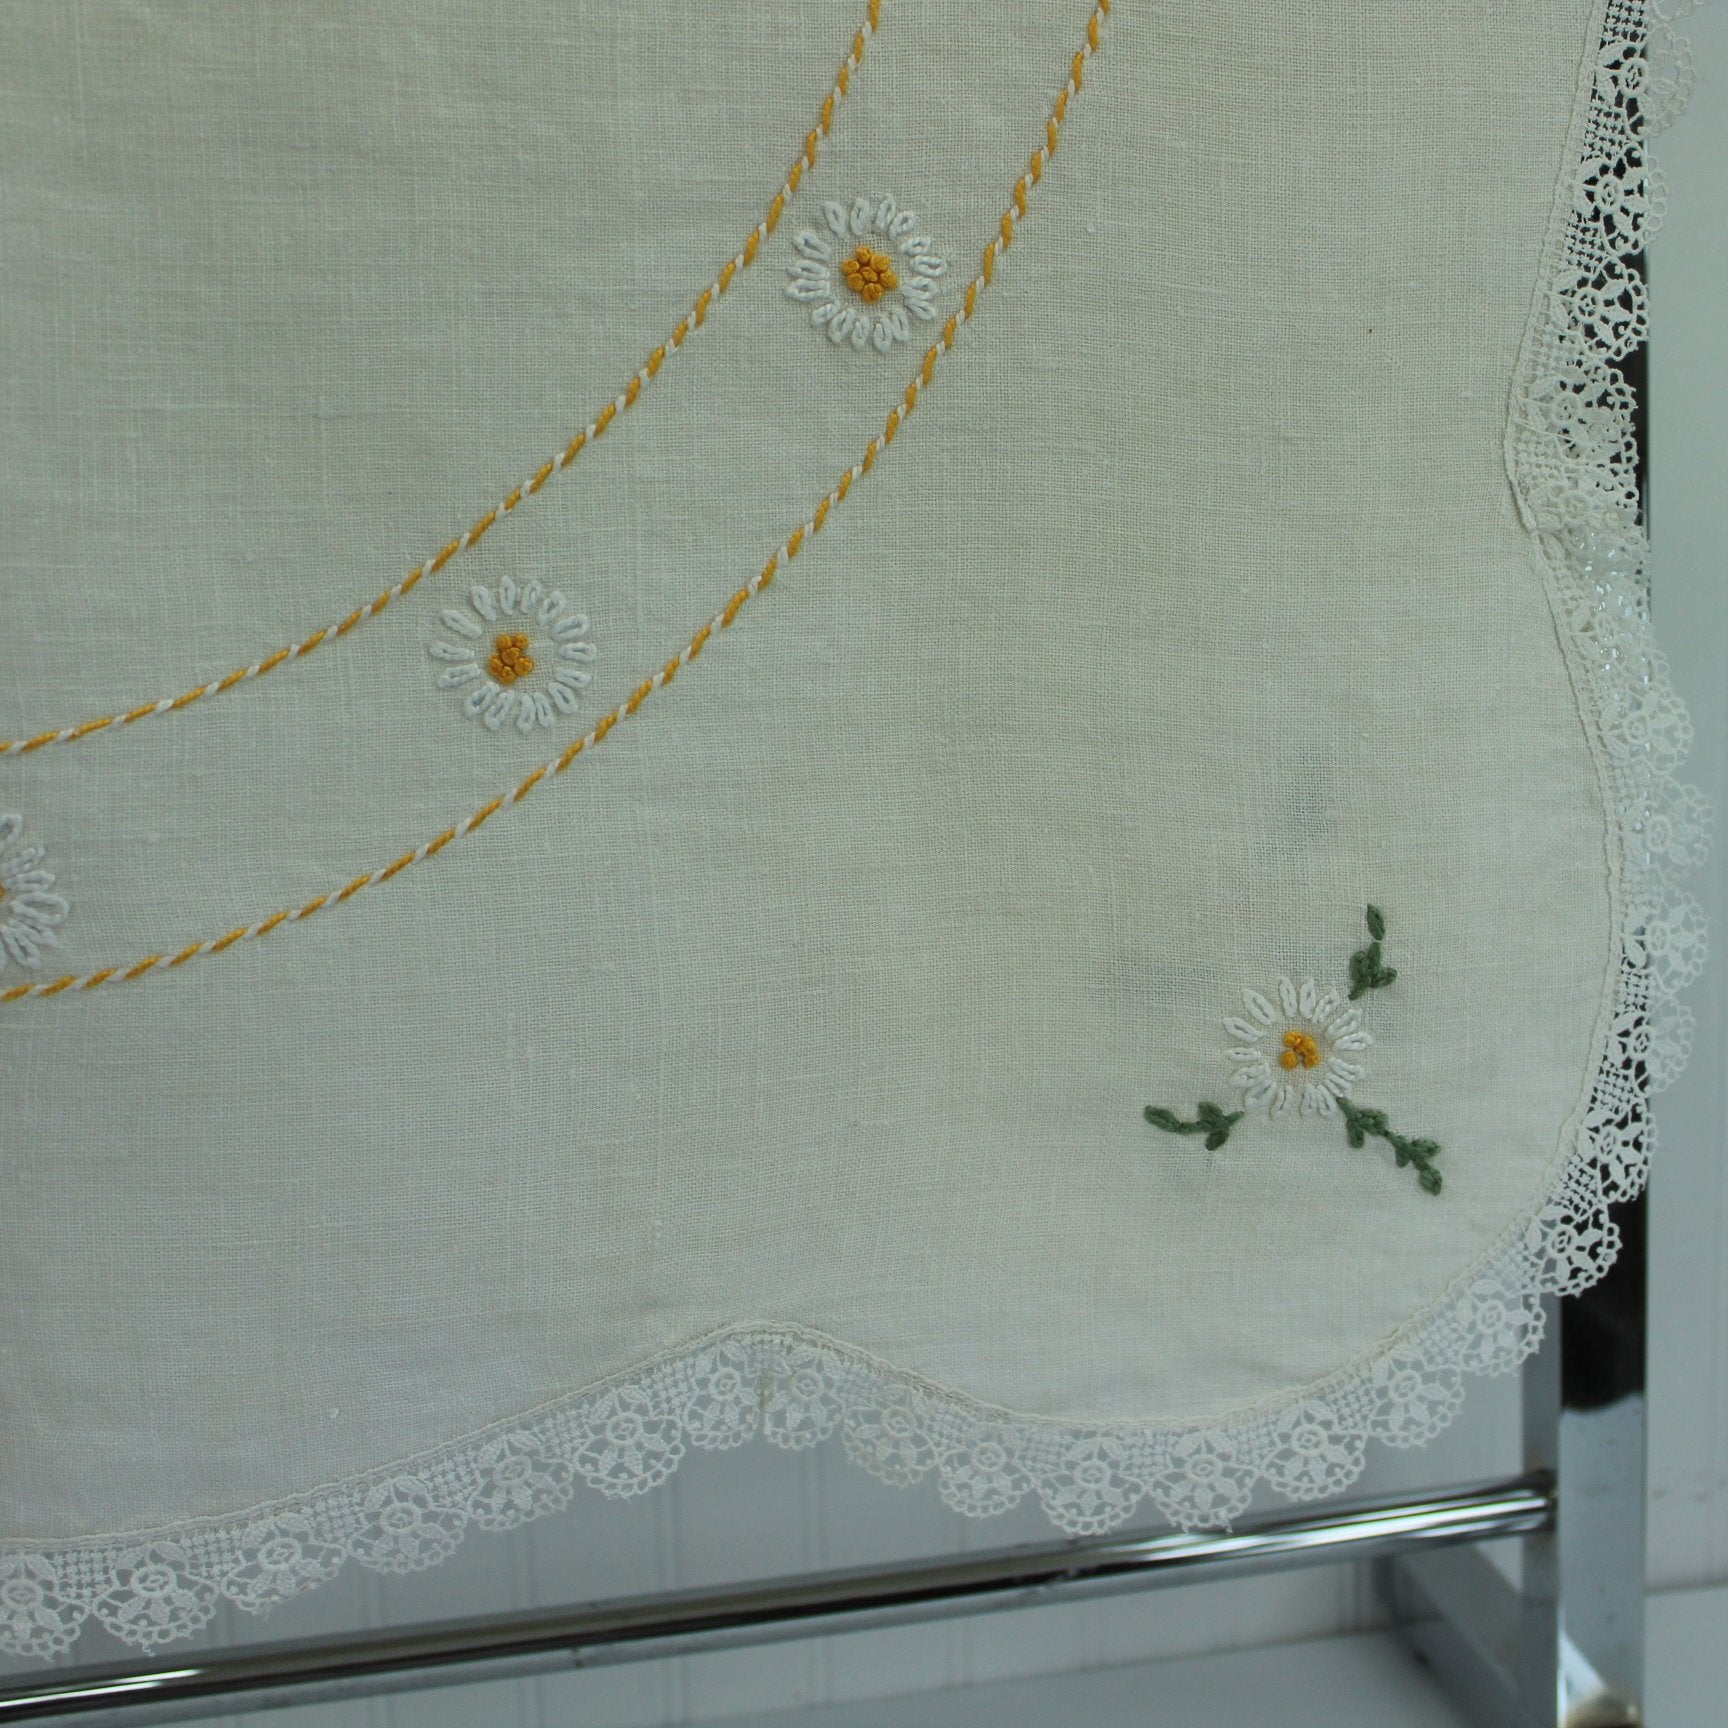 Finely Embroidered Off White Linen Table Cloth Daisies Lace Elegant Vintage corner view